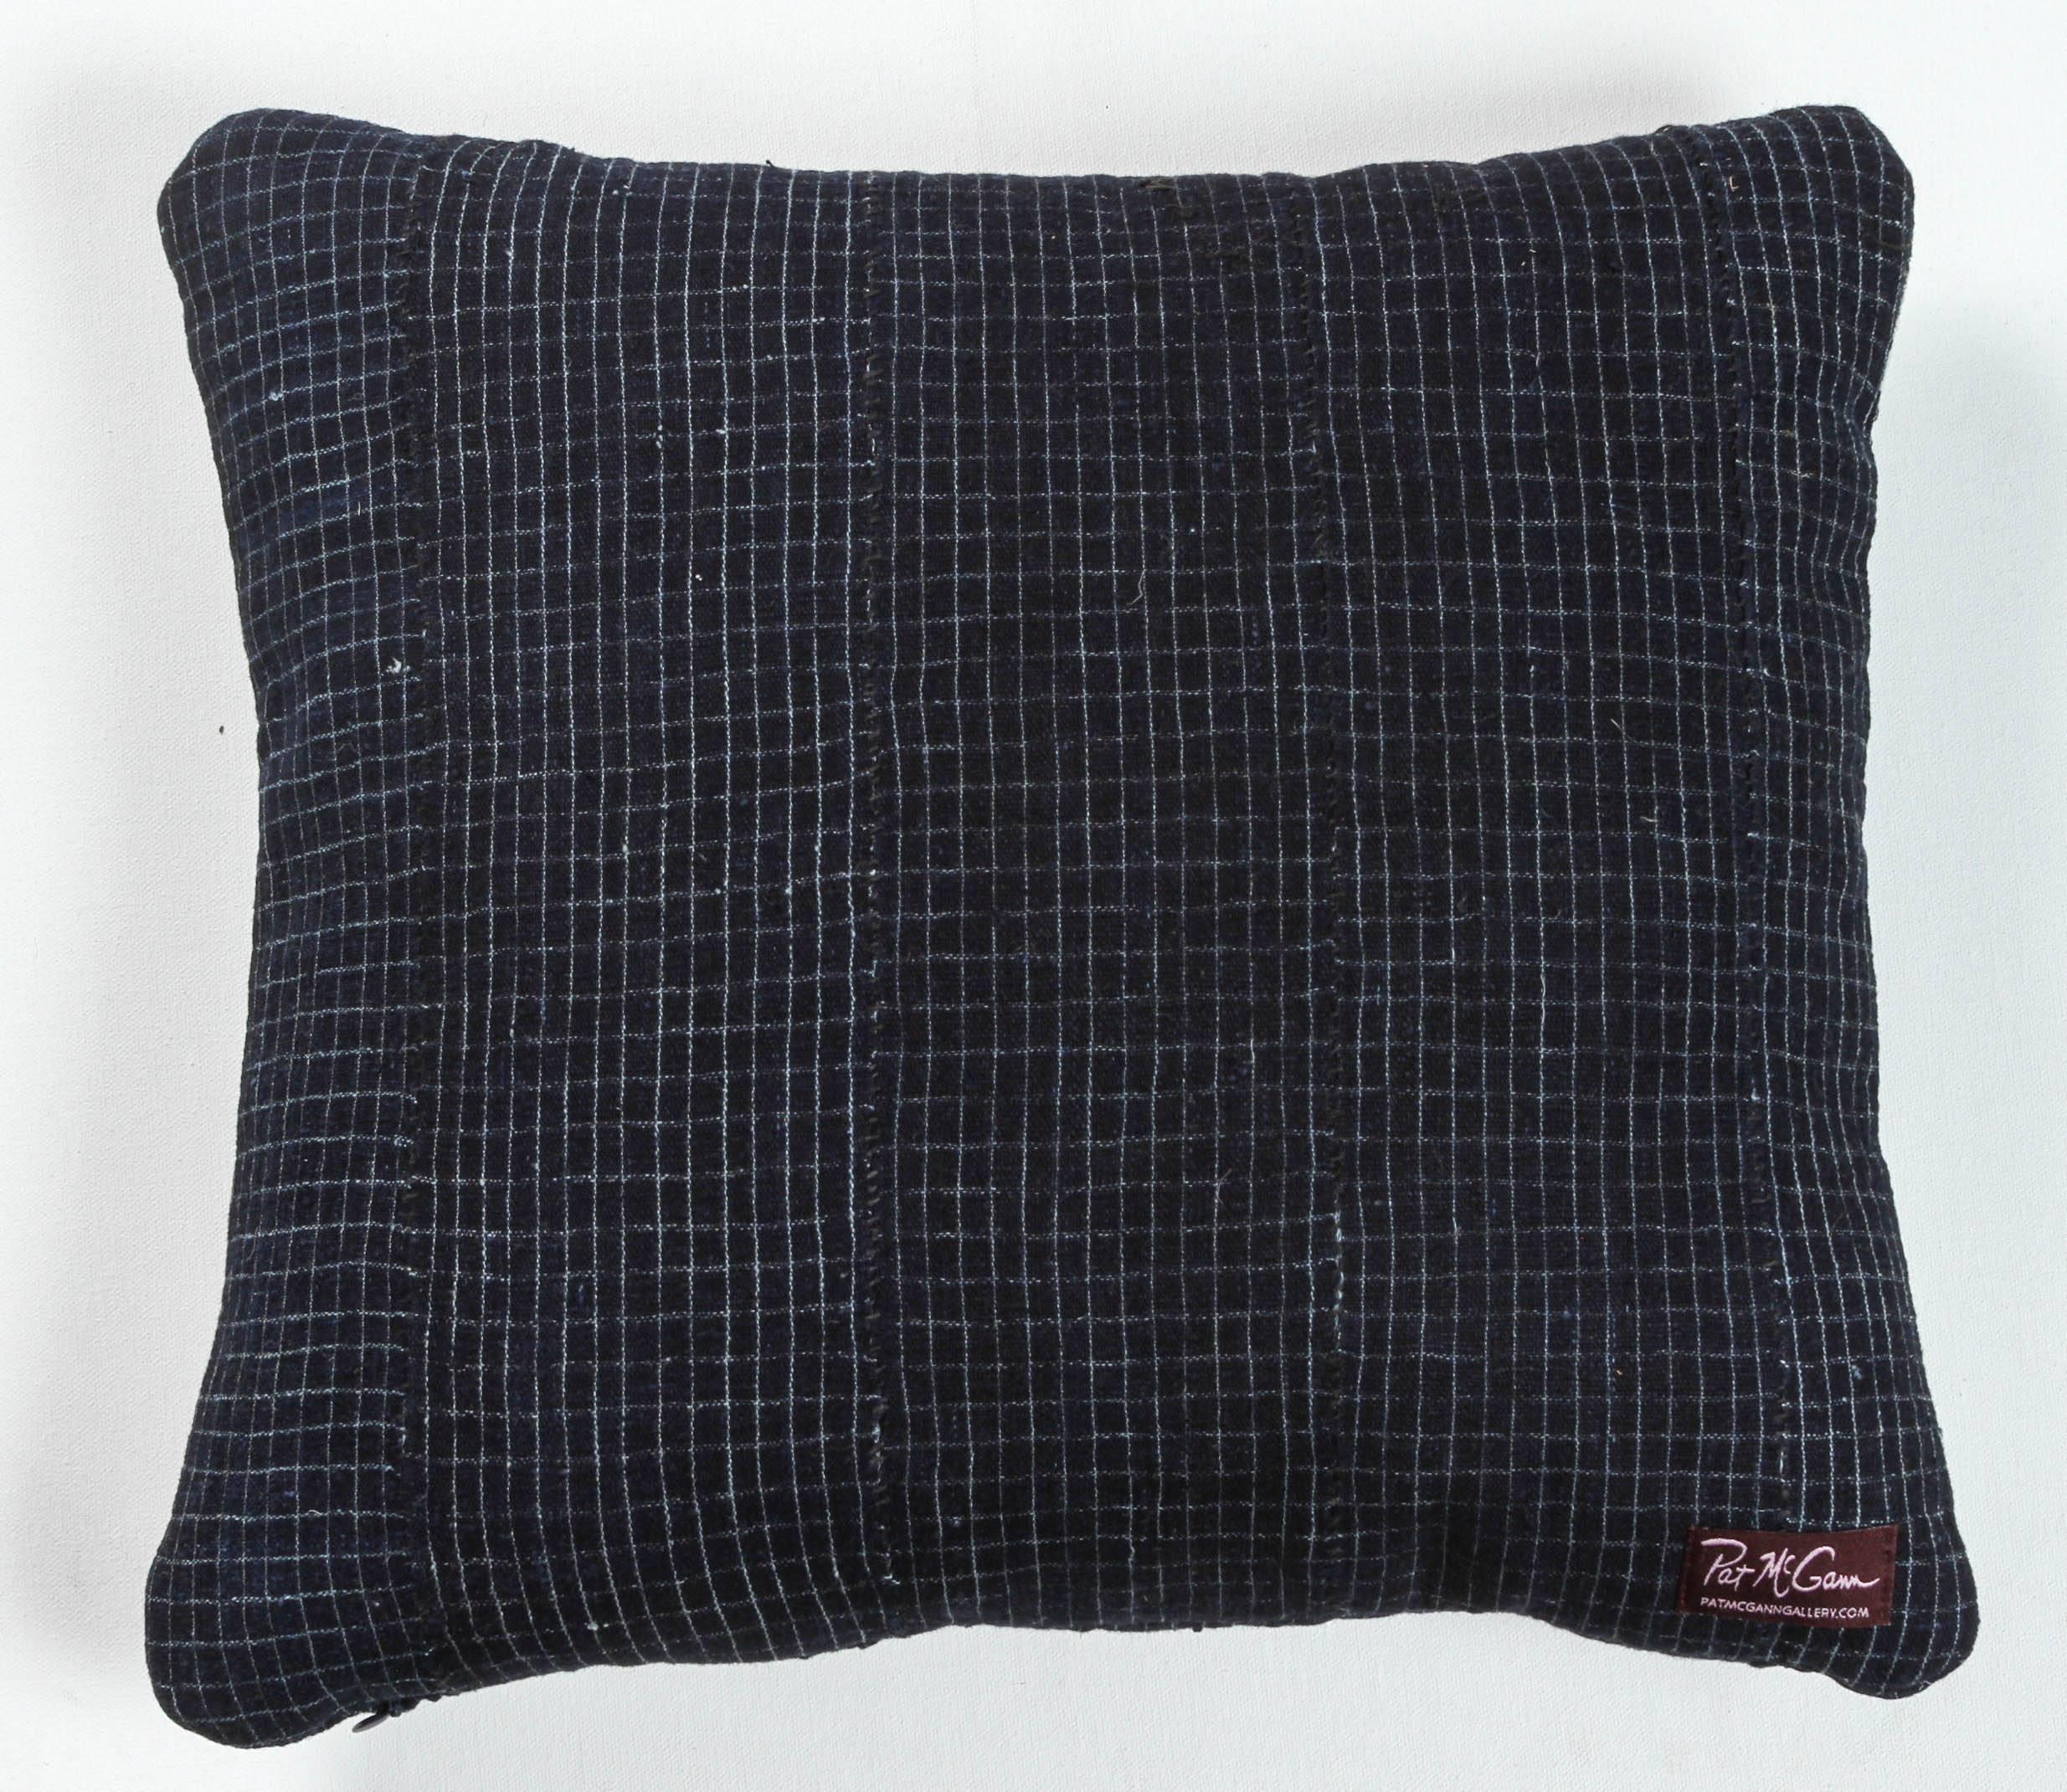 African Embroidery Pillow in Indigo Blue, Double-Sided In Good Condition For Sale In Los Angeles, CA